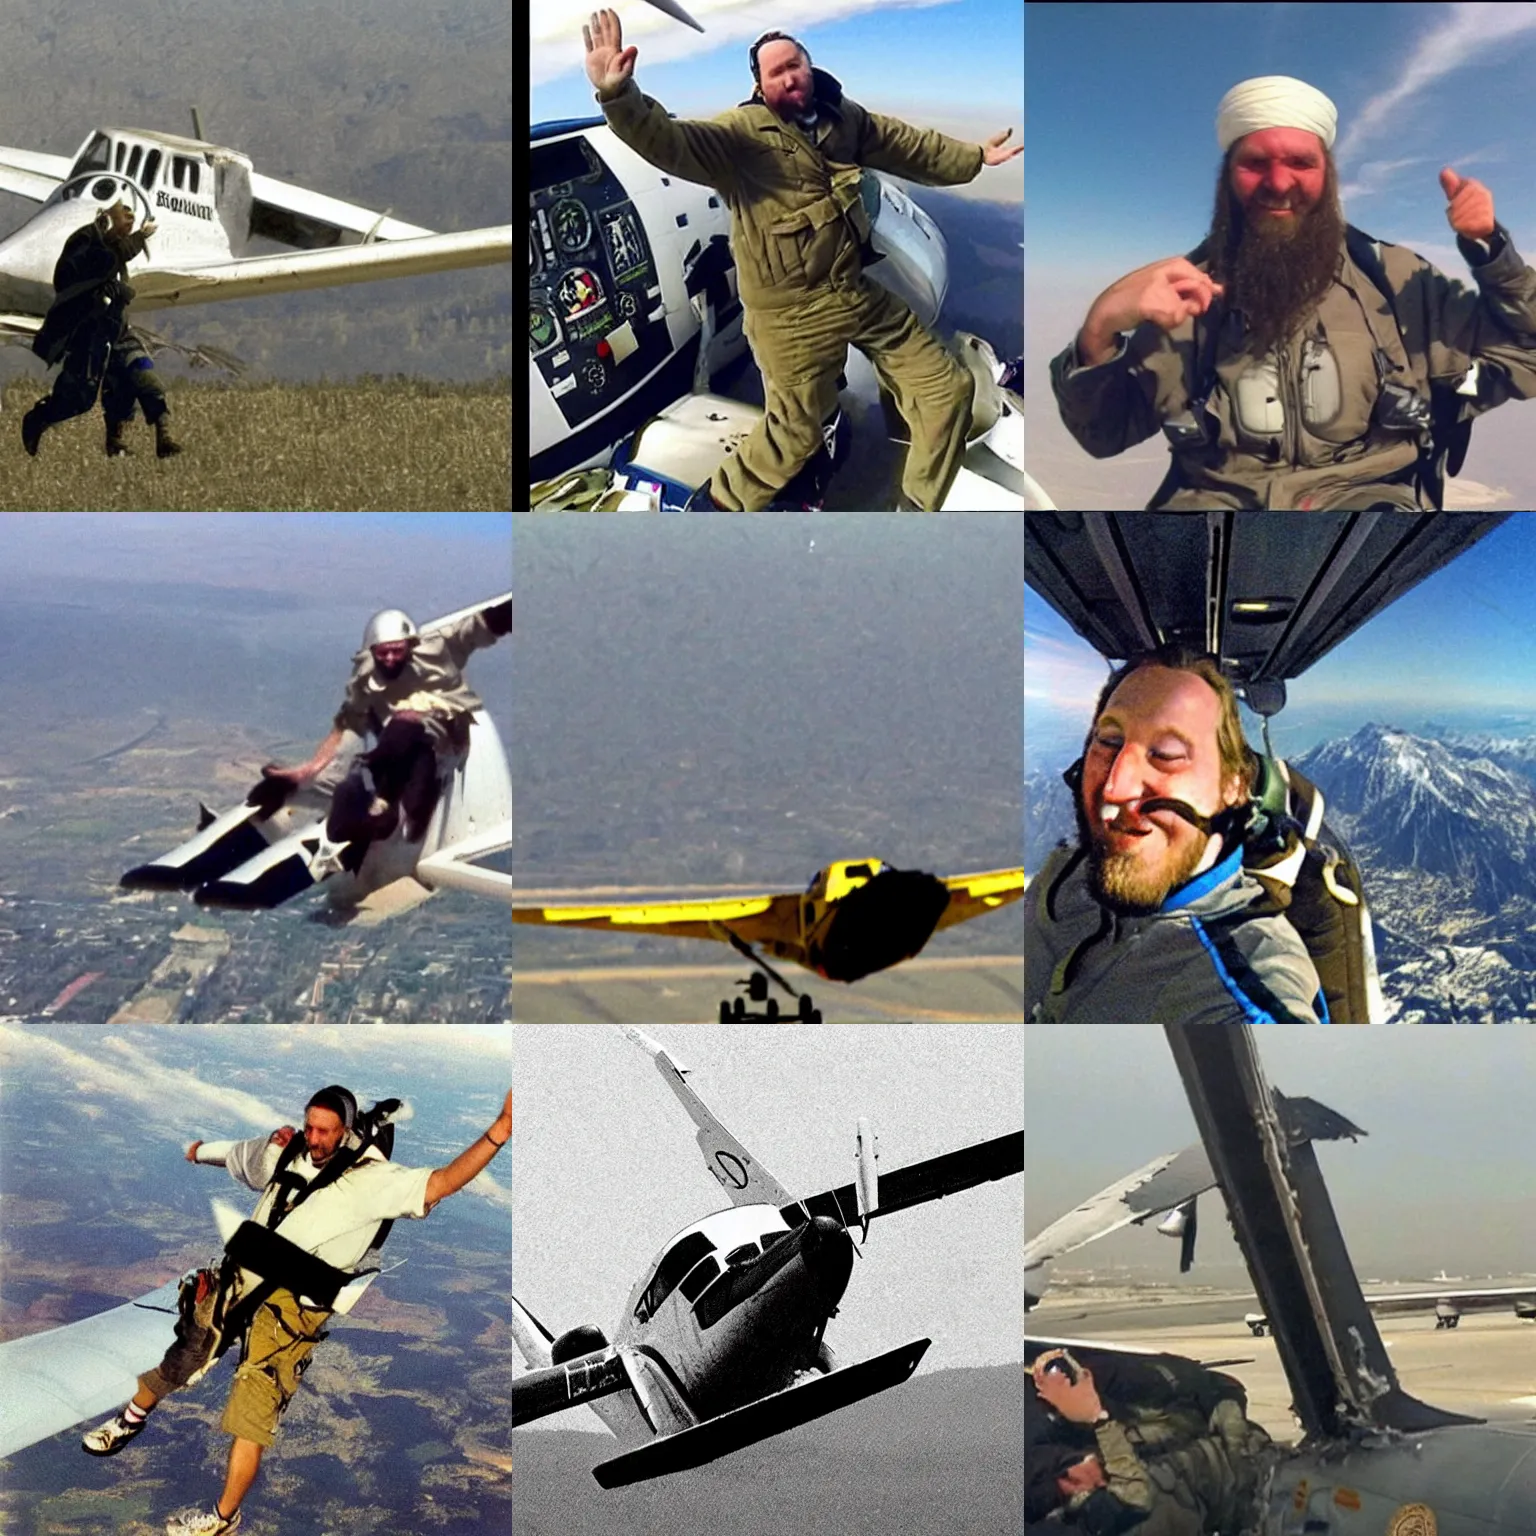 Prompt: Ben laden dabbing in a plane during a crash, photograph